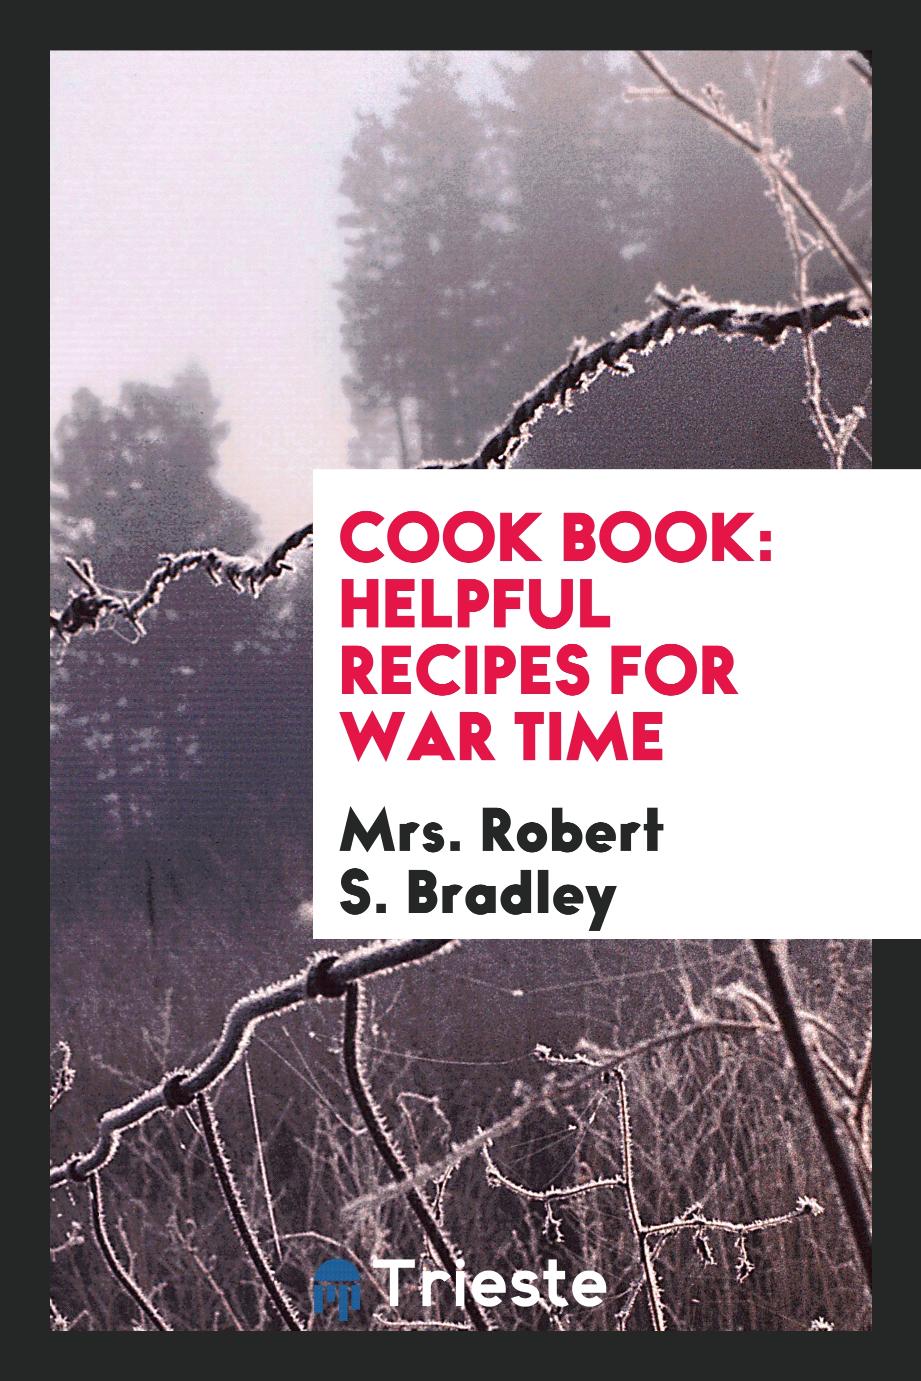 Cook Book: Helpful Recipes for War Time